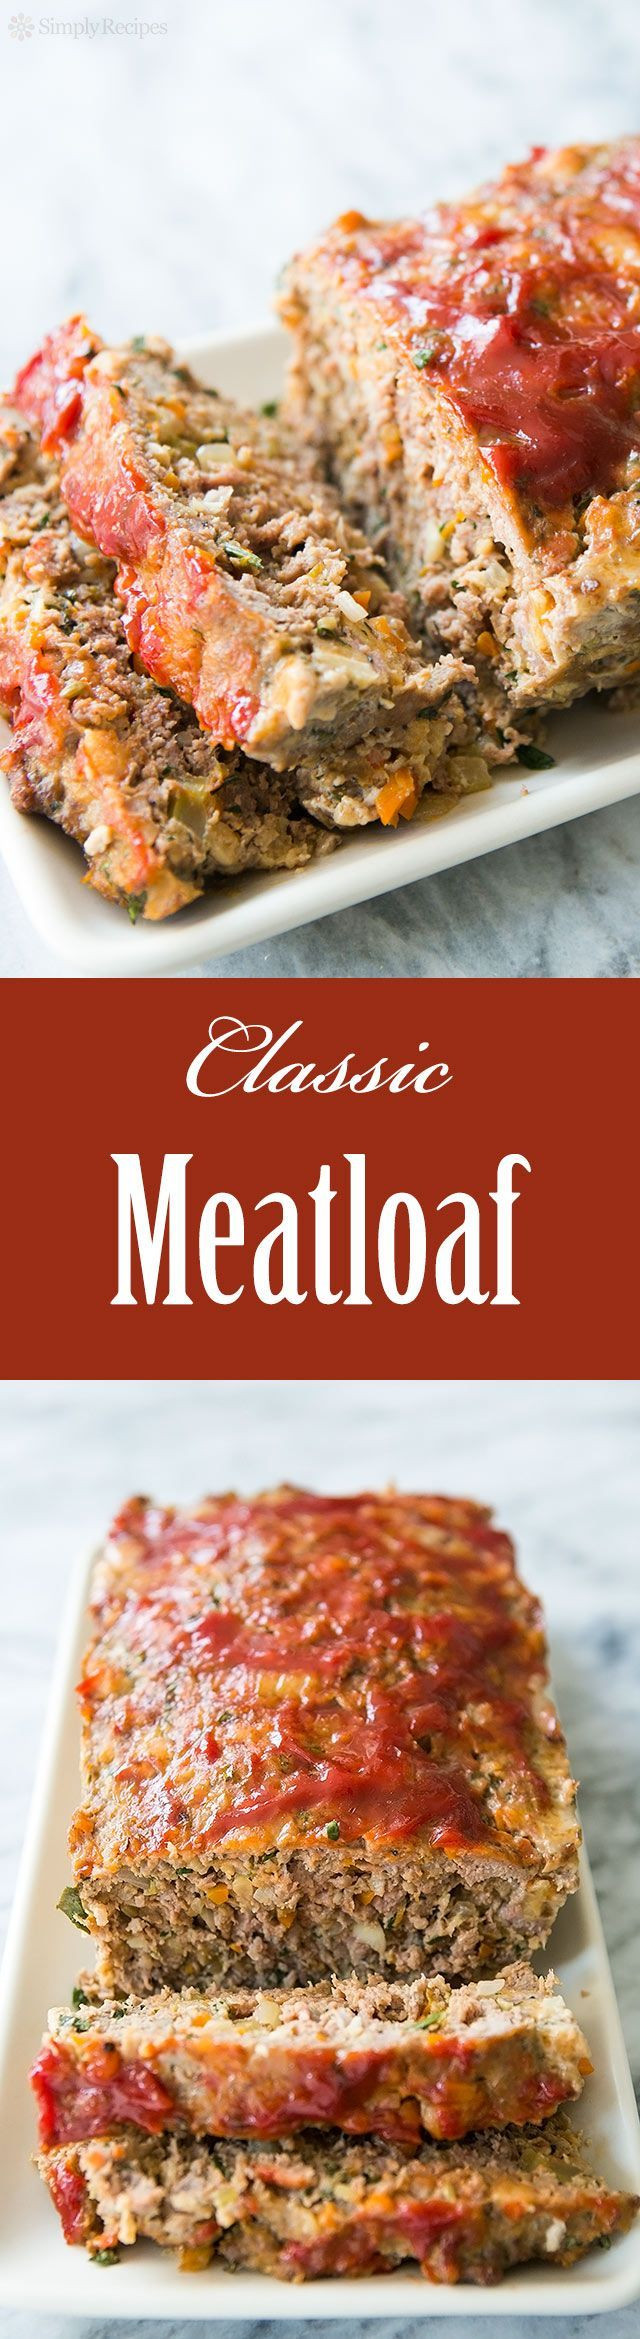 Italian Sausage Meatloaf
 Classic Meatloaf Traditional meatloaf recipe with the